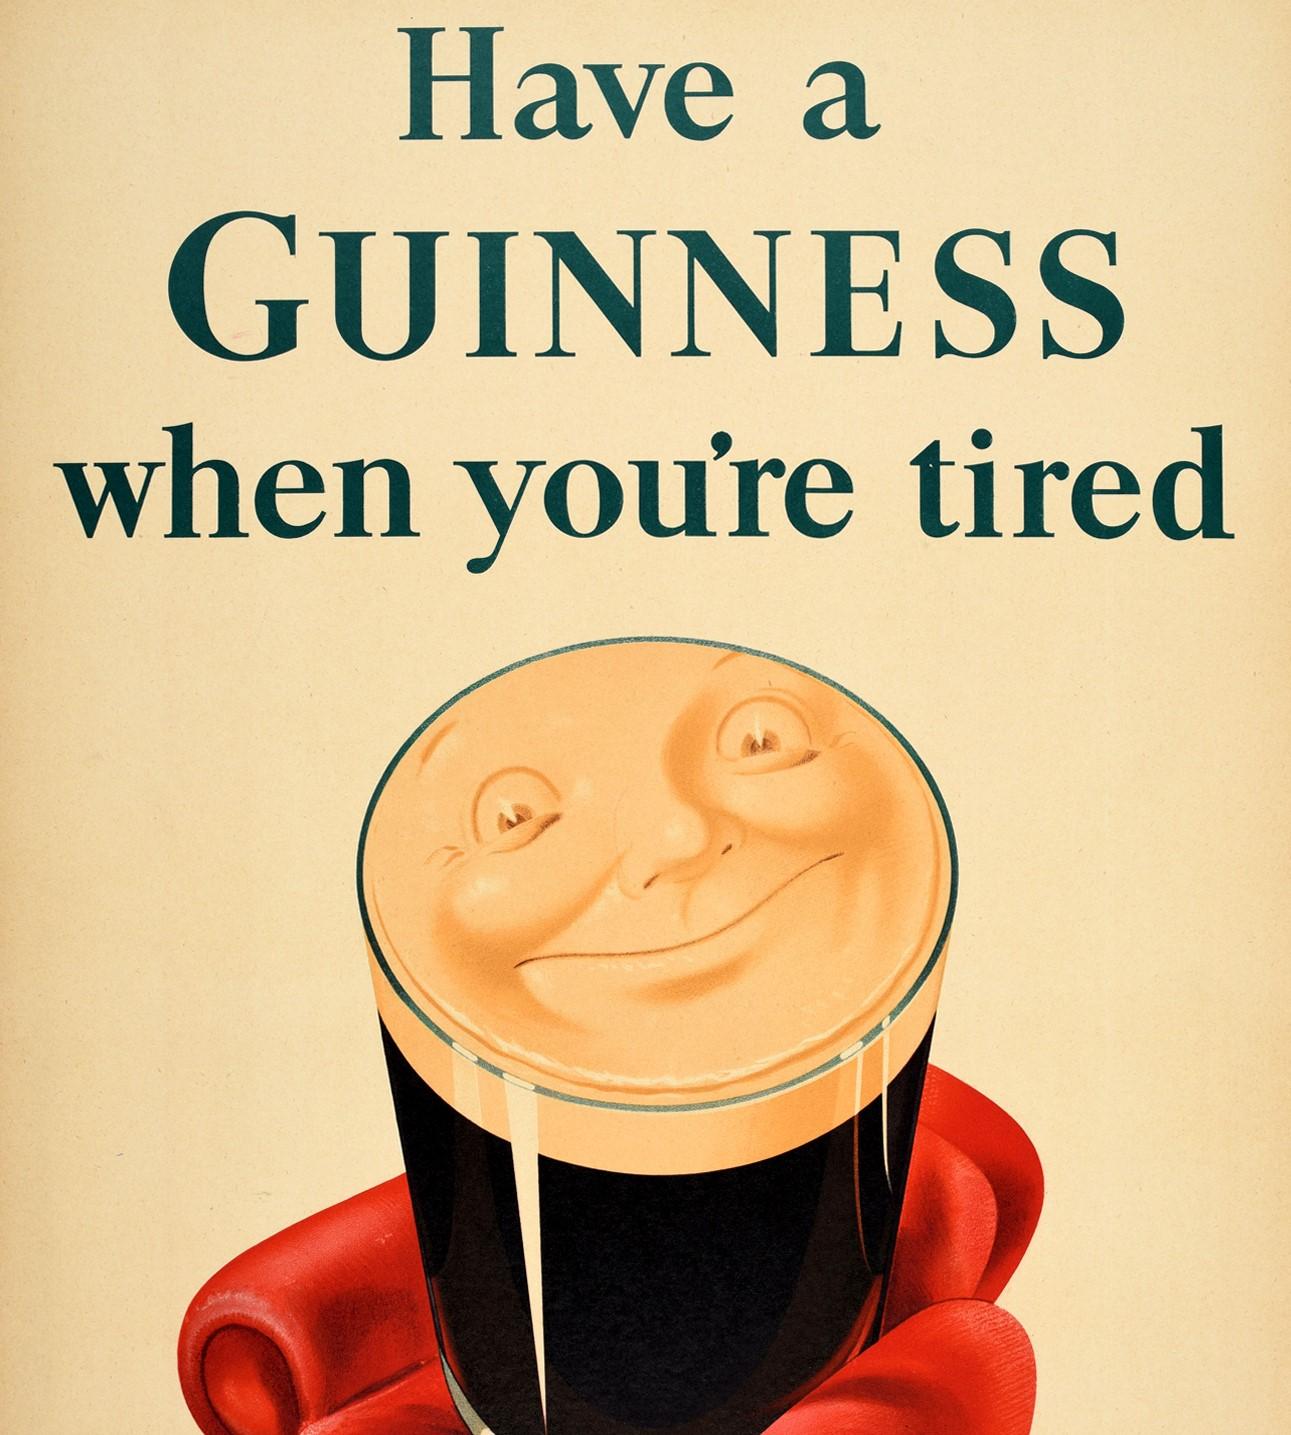 gilroy guinness posters